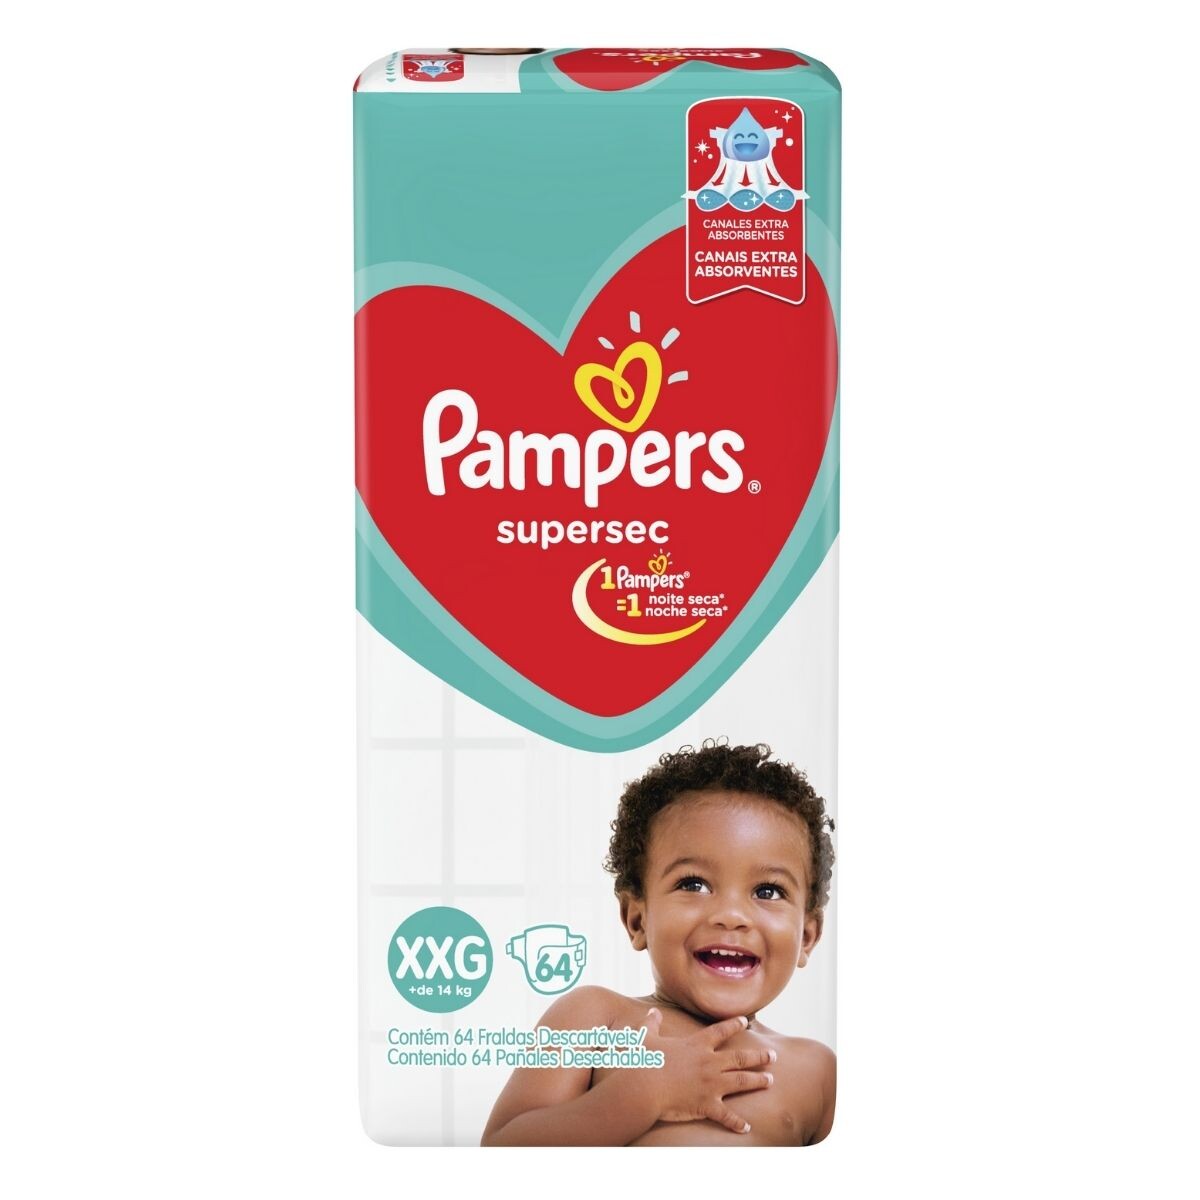 Pañales Pampers Supersec XXG X64 